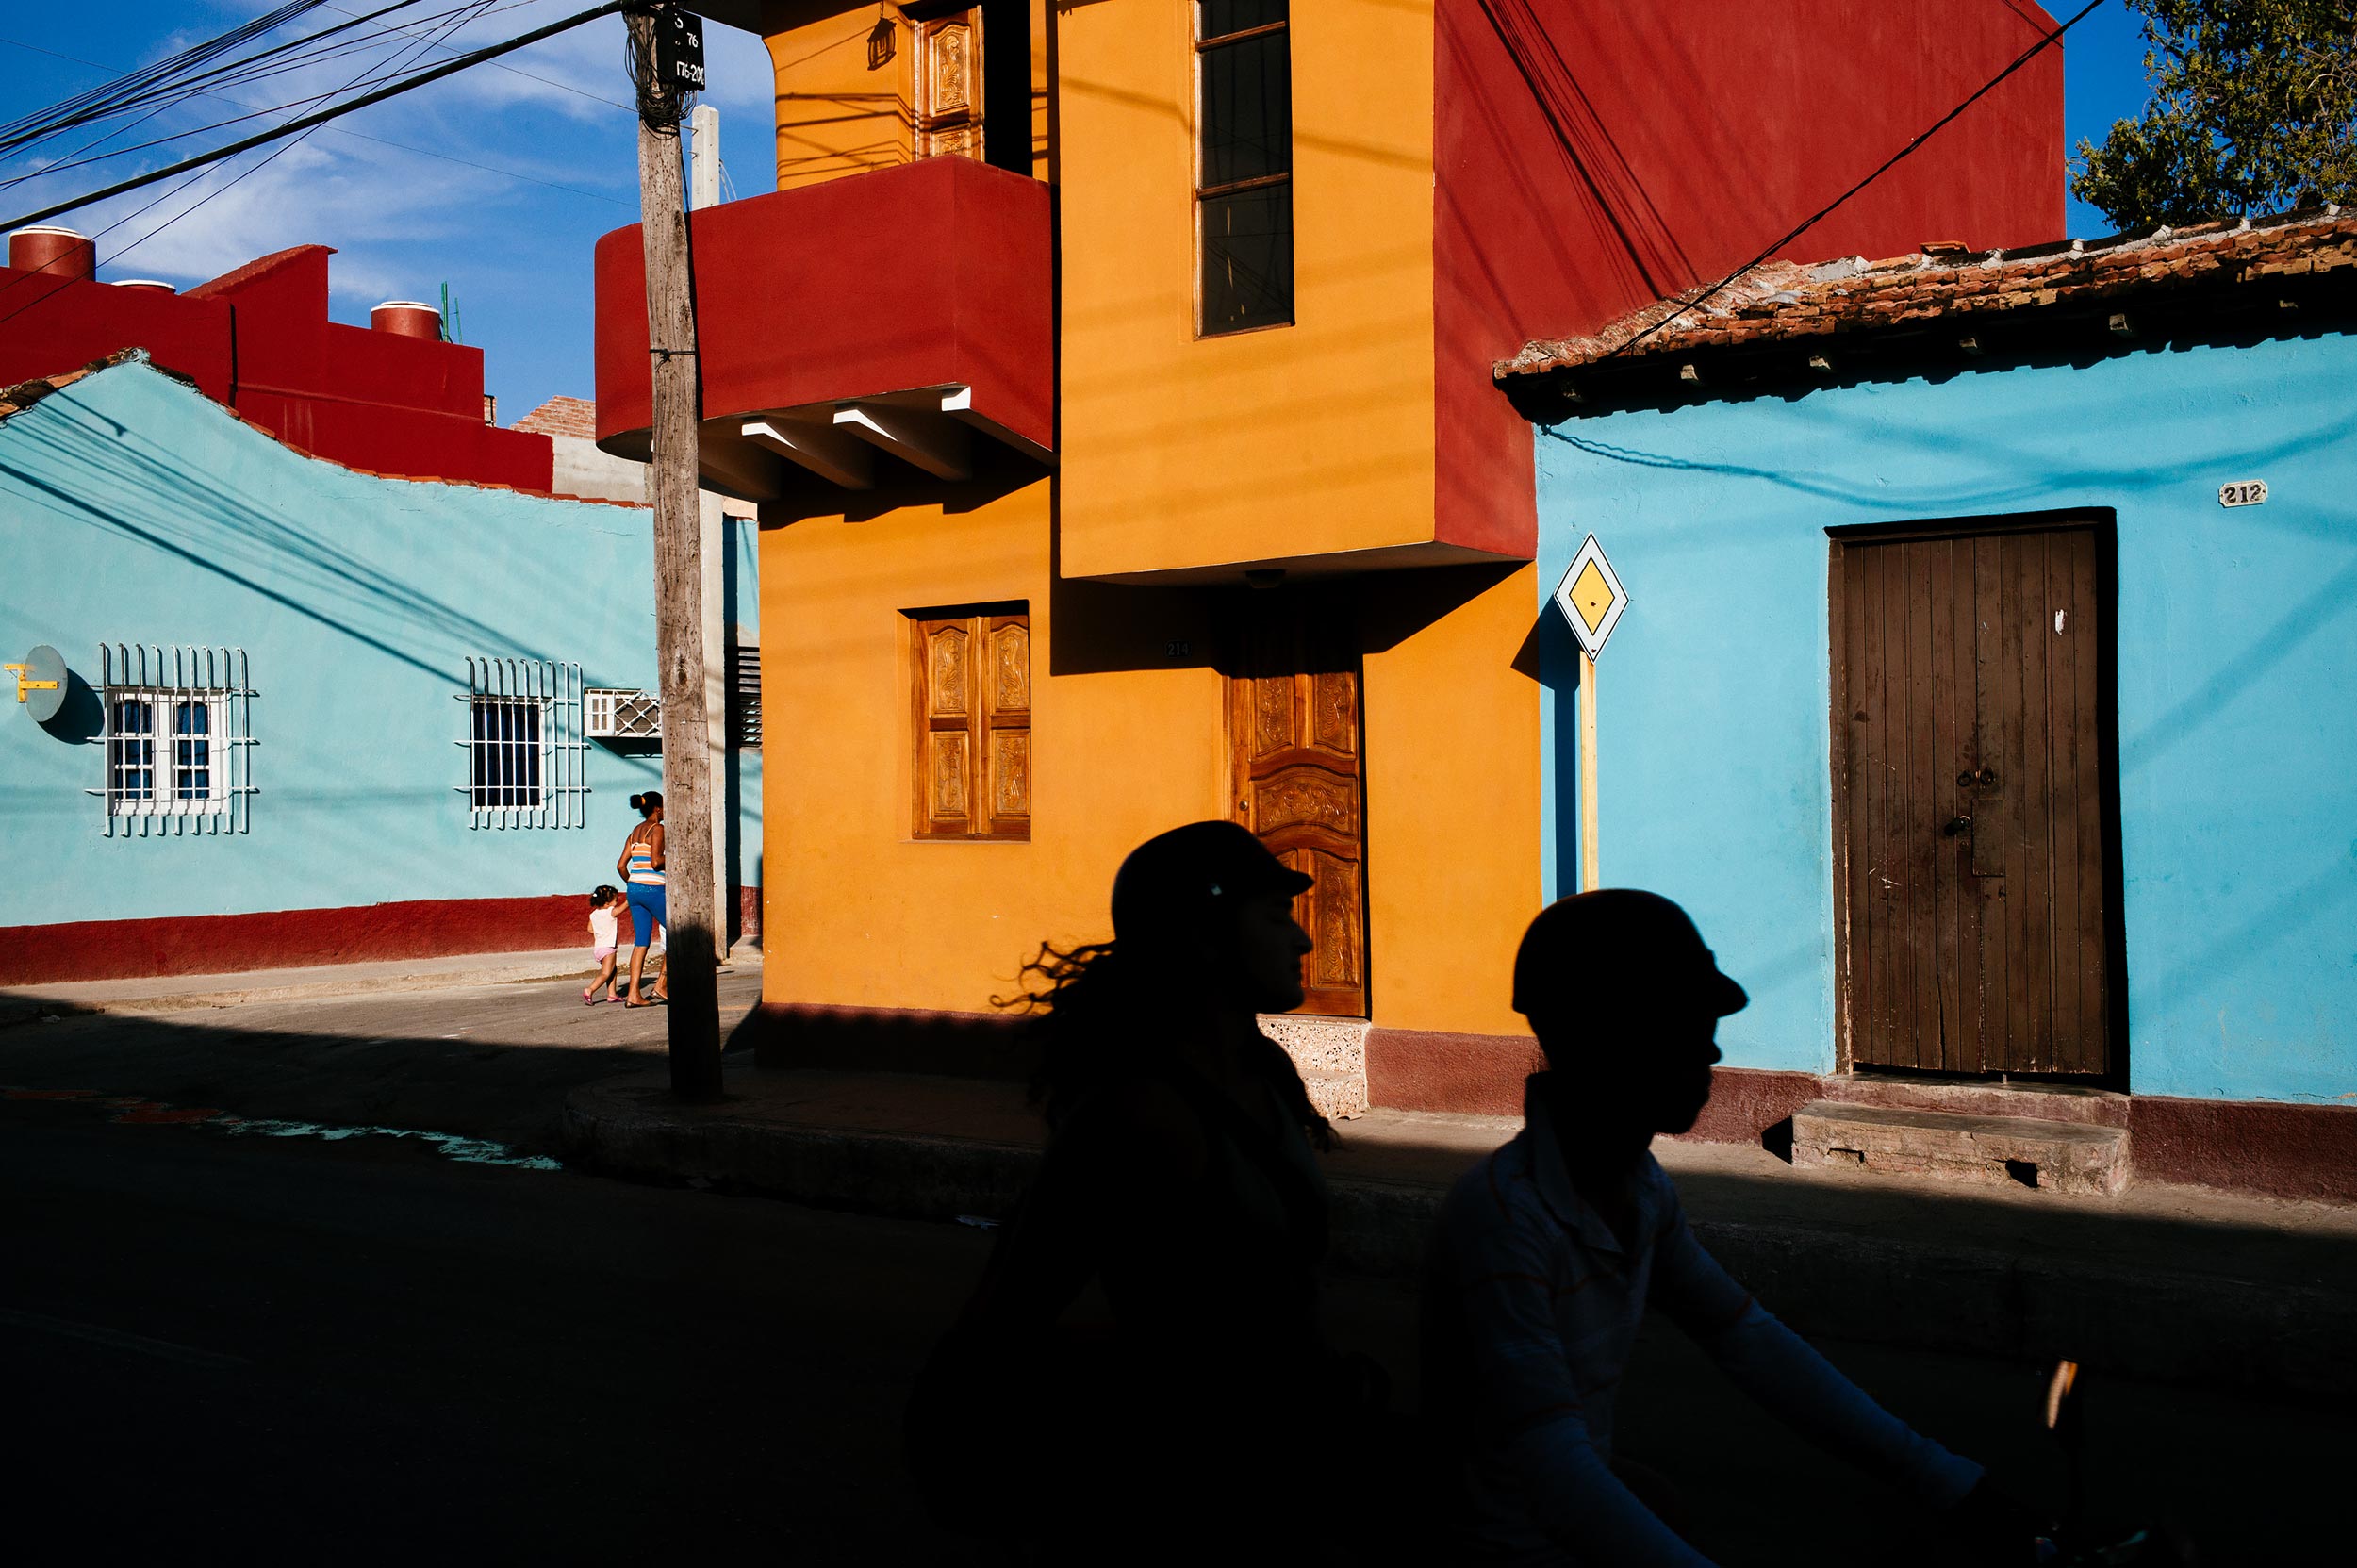 Trinidad-2016-scooter-passes-in-front-of-coloured-houses-while-woman-walks-with-small-daughter-street-photography-by-Alessandro-Avenali.jpg